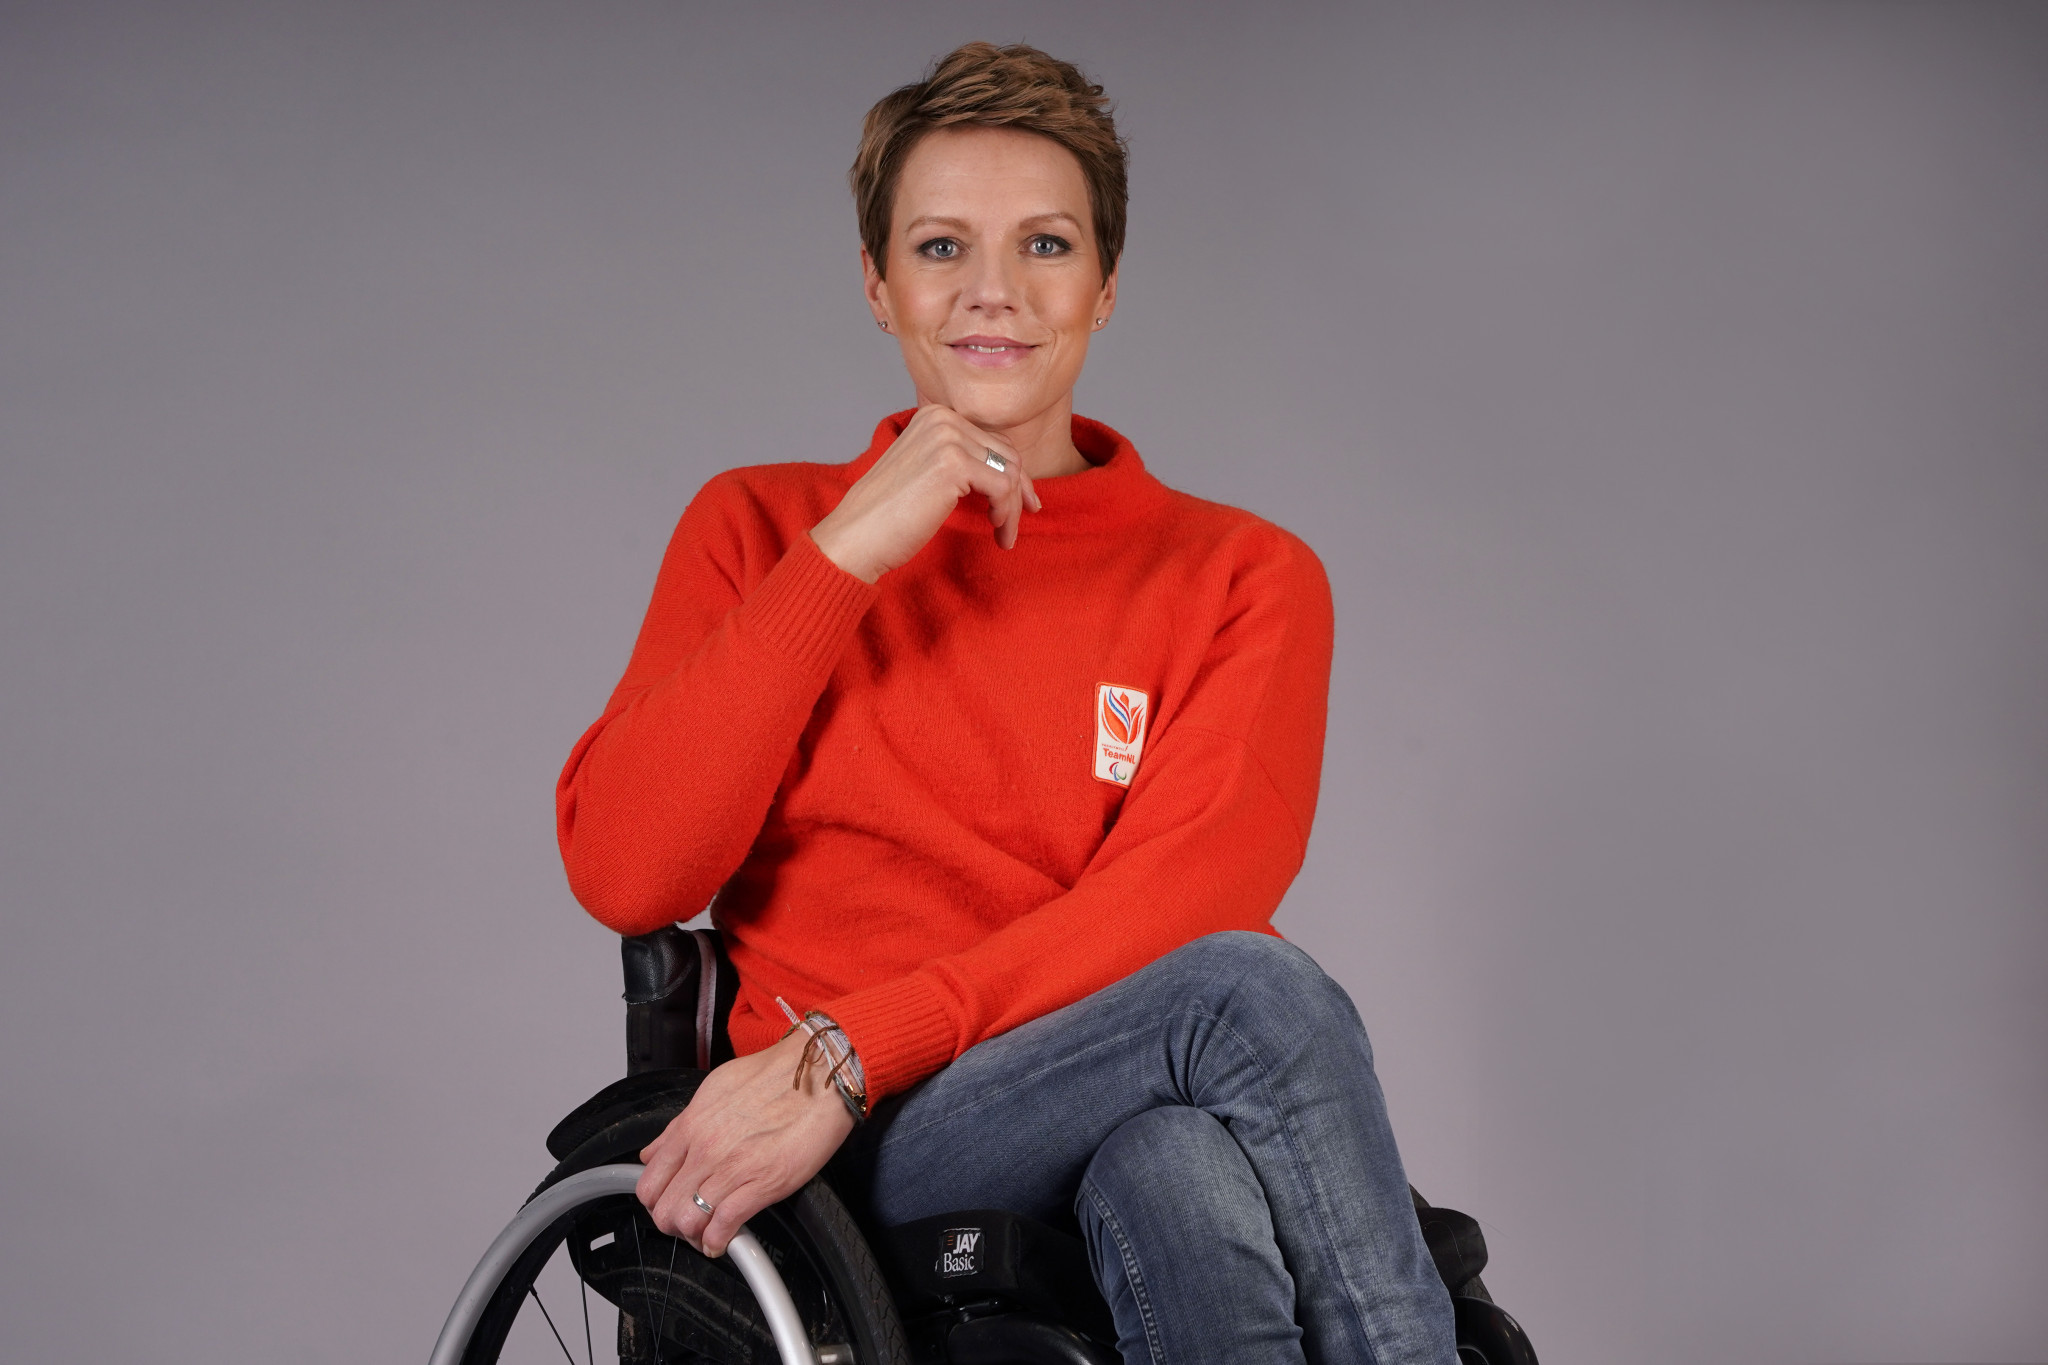 Seven-time Paralympic gold medallist Vergeer nominated for position on IPC Governing Board